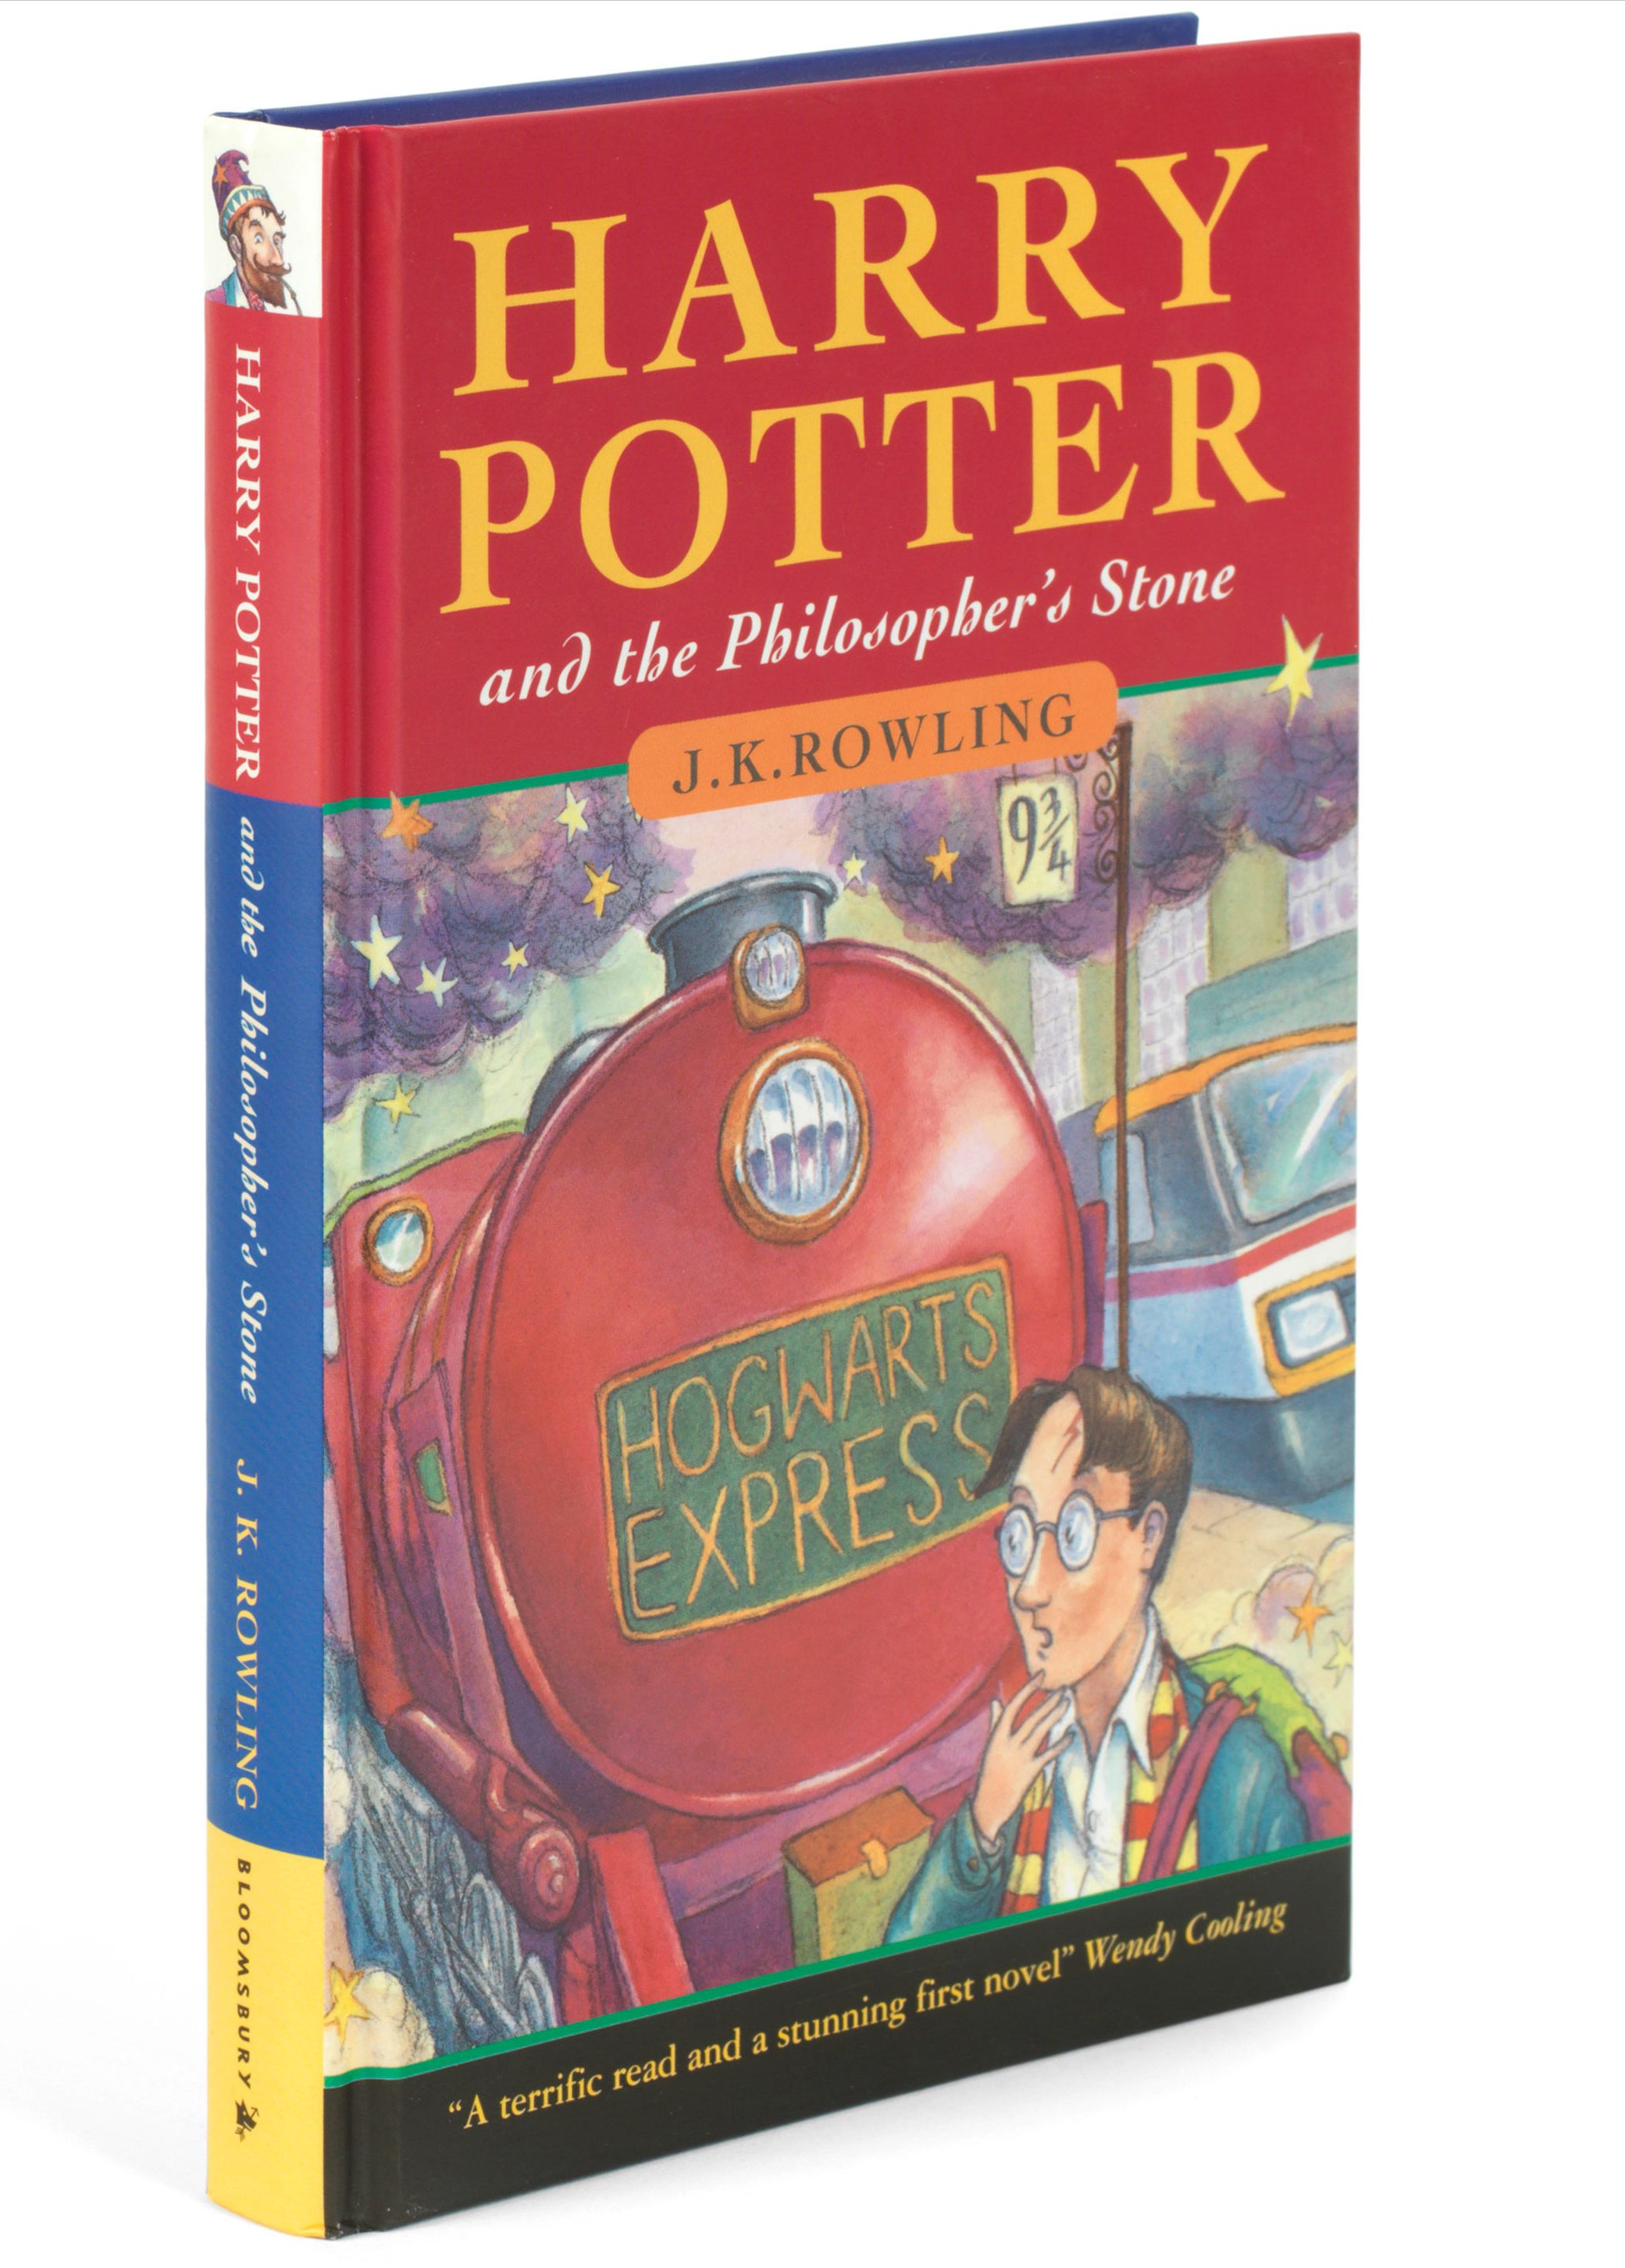 Rare First Edition Error of Harry Potter Book Expected to Bring in $25K